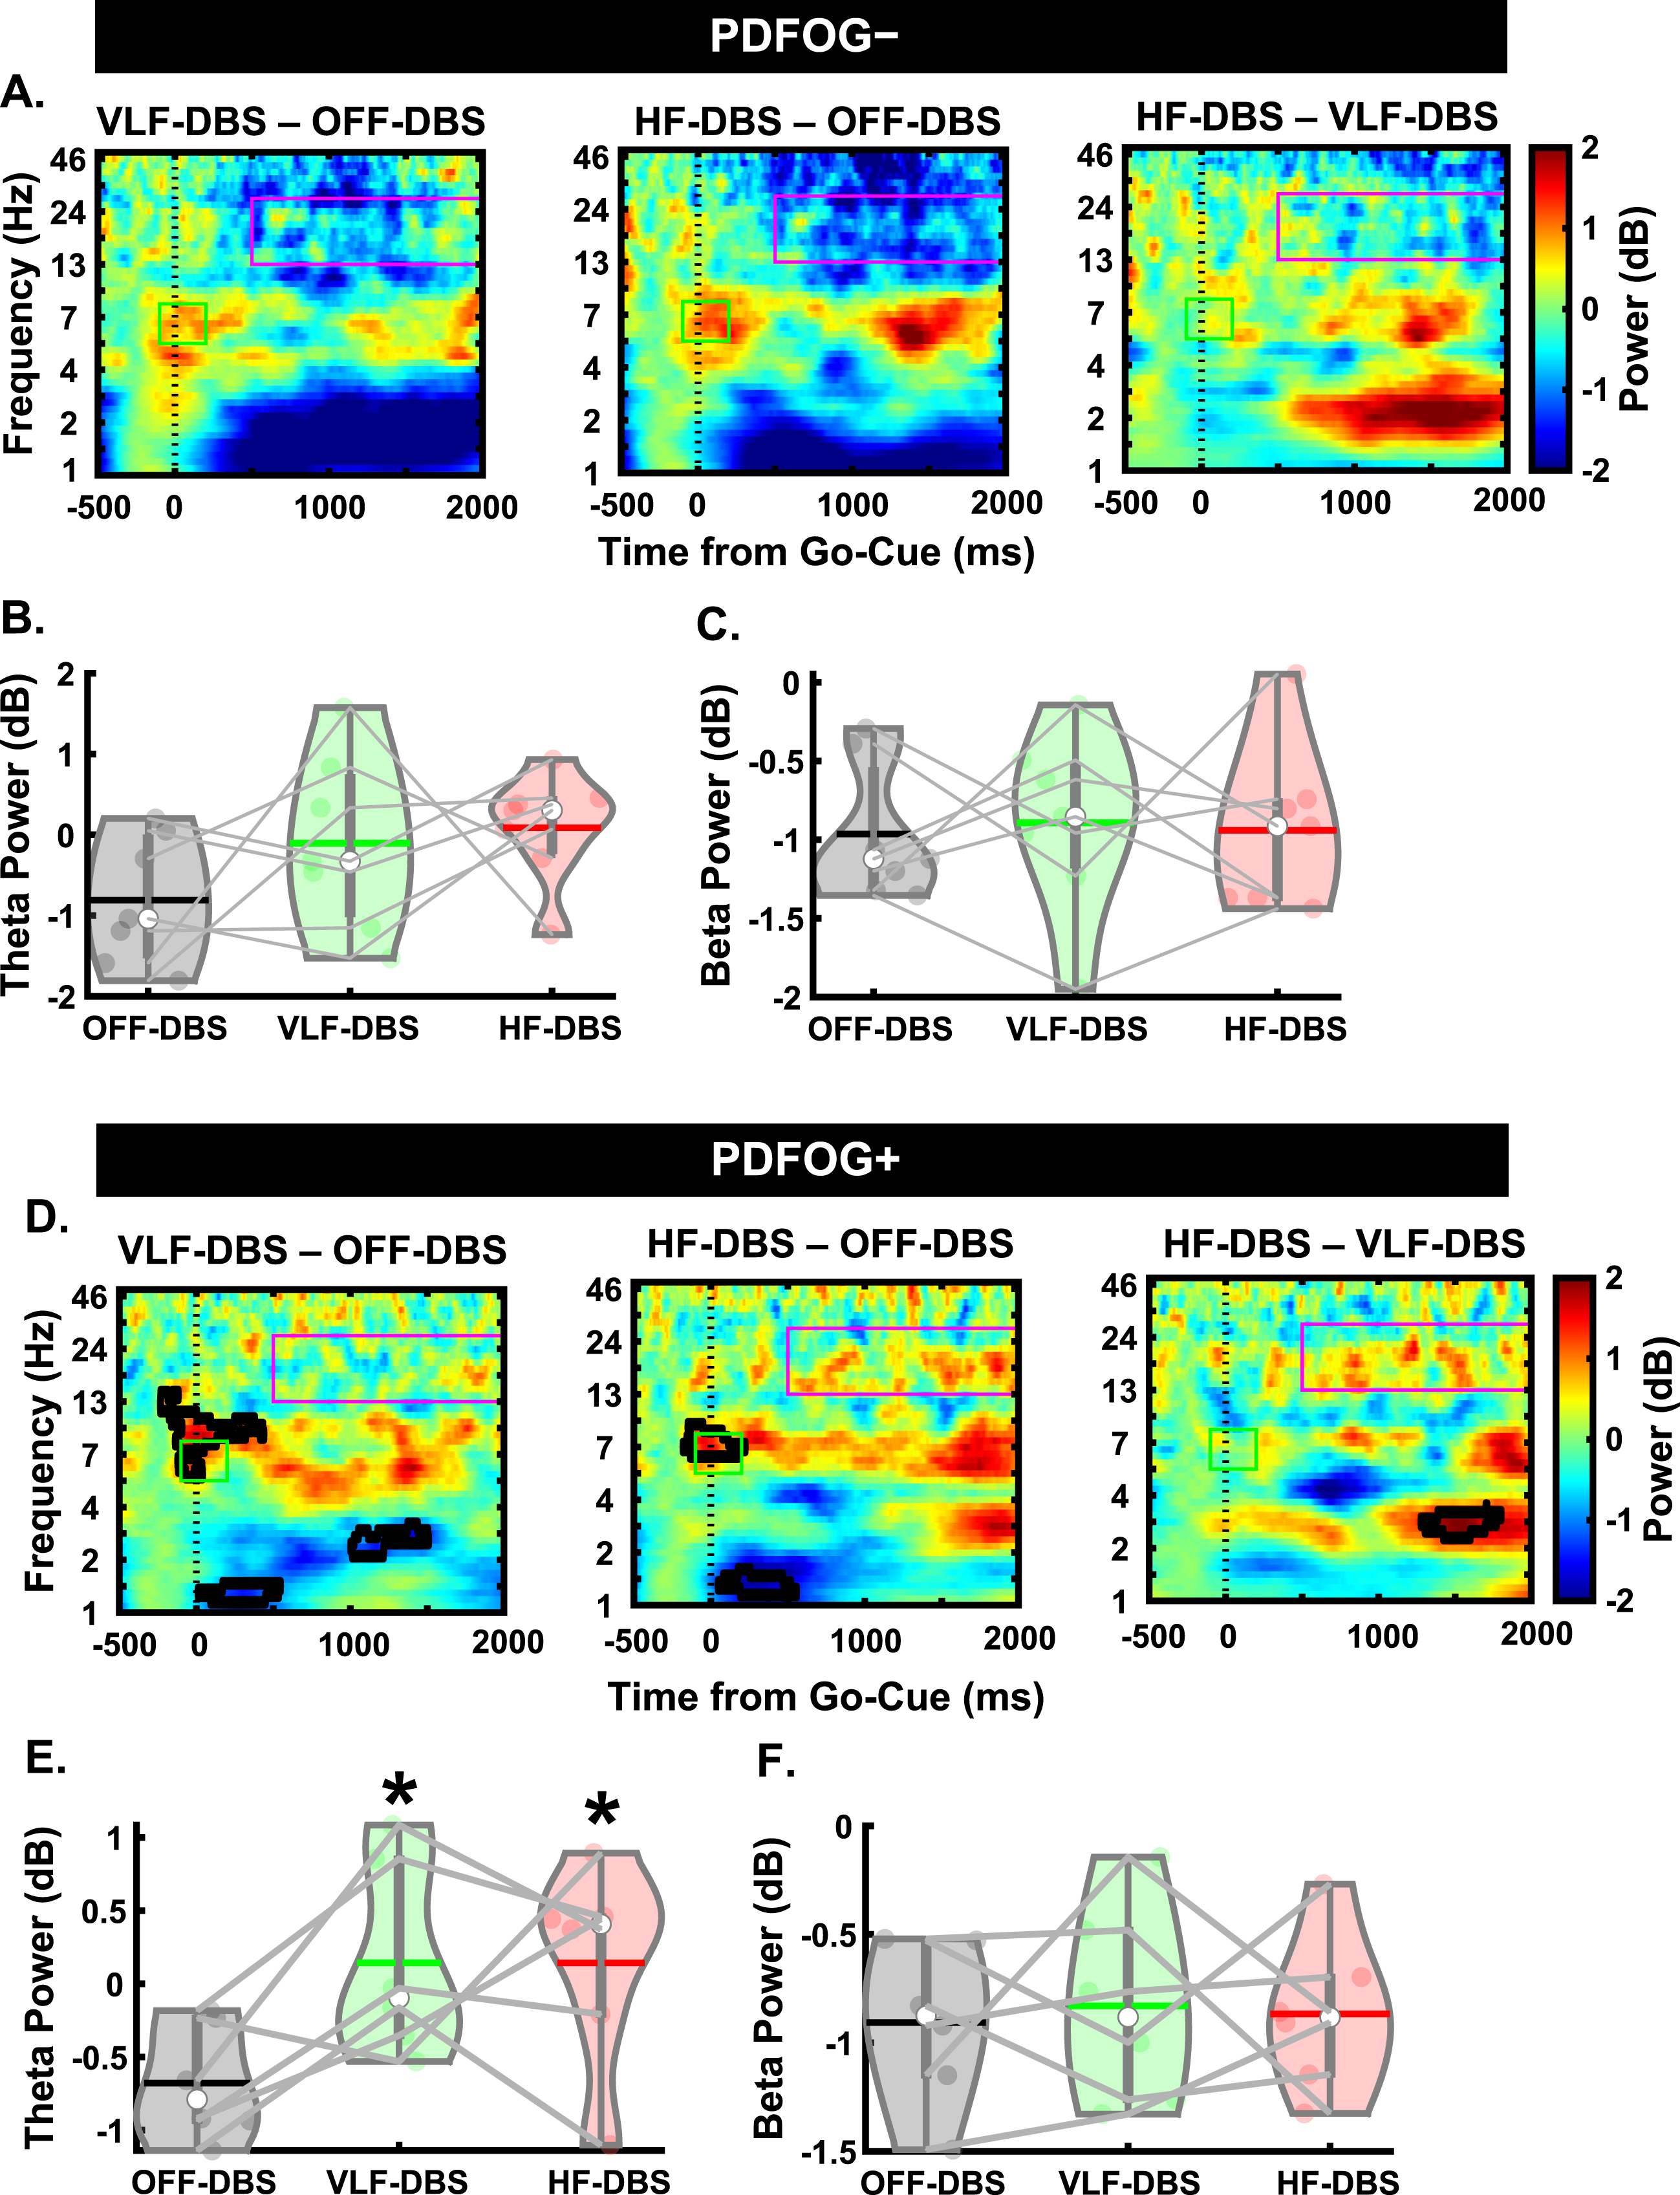 Different responses to STN-DBS between PDFOG–and PDFOG + subgroups during the lower-limb pedaling task. A) Time-frequency plots demonstrating differences between STN very low-frequency (VLF)-DBS and OFF-DBS (left), high-frequency (HF)-DBS and OFF-DBS (middle), and HF-DBS and VLF-DBS (right) for the PDFOG–subgroup. B, C) No effects of stimulation are observed in the theta and beta frequency bands for PDFOG–. D) Time-frequency plots demonstrating differences between STN VLF-DBS and OFF-DBS (left), HF-DBS and OFF-DBS (middle), and HF-DBS and VLF-DBS (right) for the PDFOG + subgroup. E) Both VLF- and HF-DBS result in increased theta-power during the pedaling task for the PDFOG + subgroup. F) No effect of STN-DBS is observed in the beta-band for the PDFOG + subgroup. *p < 0.05 vs. OFF. In violin plots, horizontal lines and white circles represent the mean and median values, respectively.